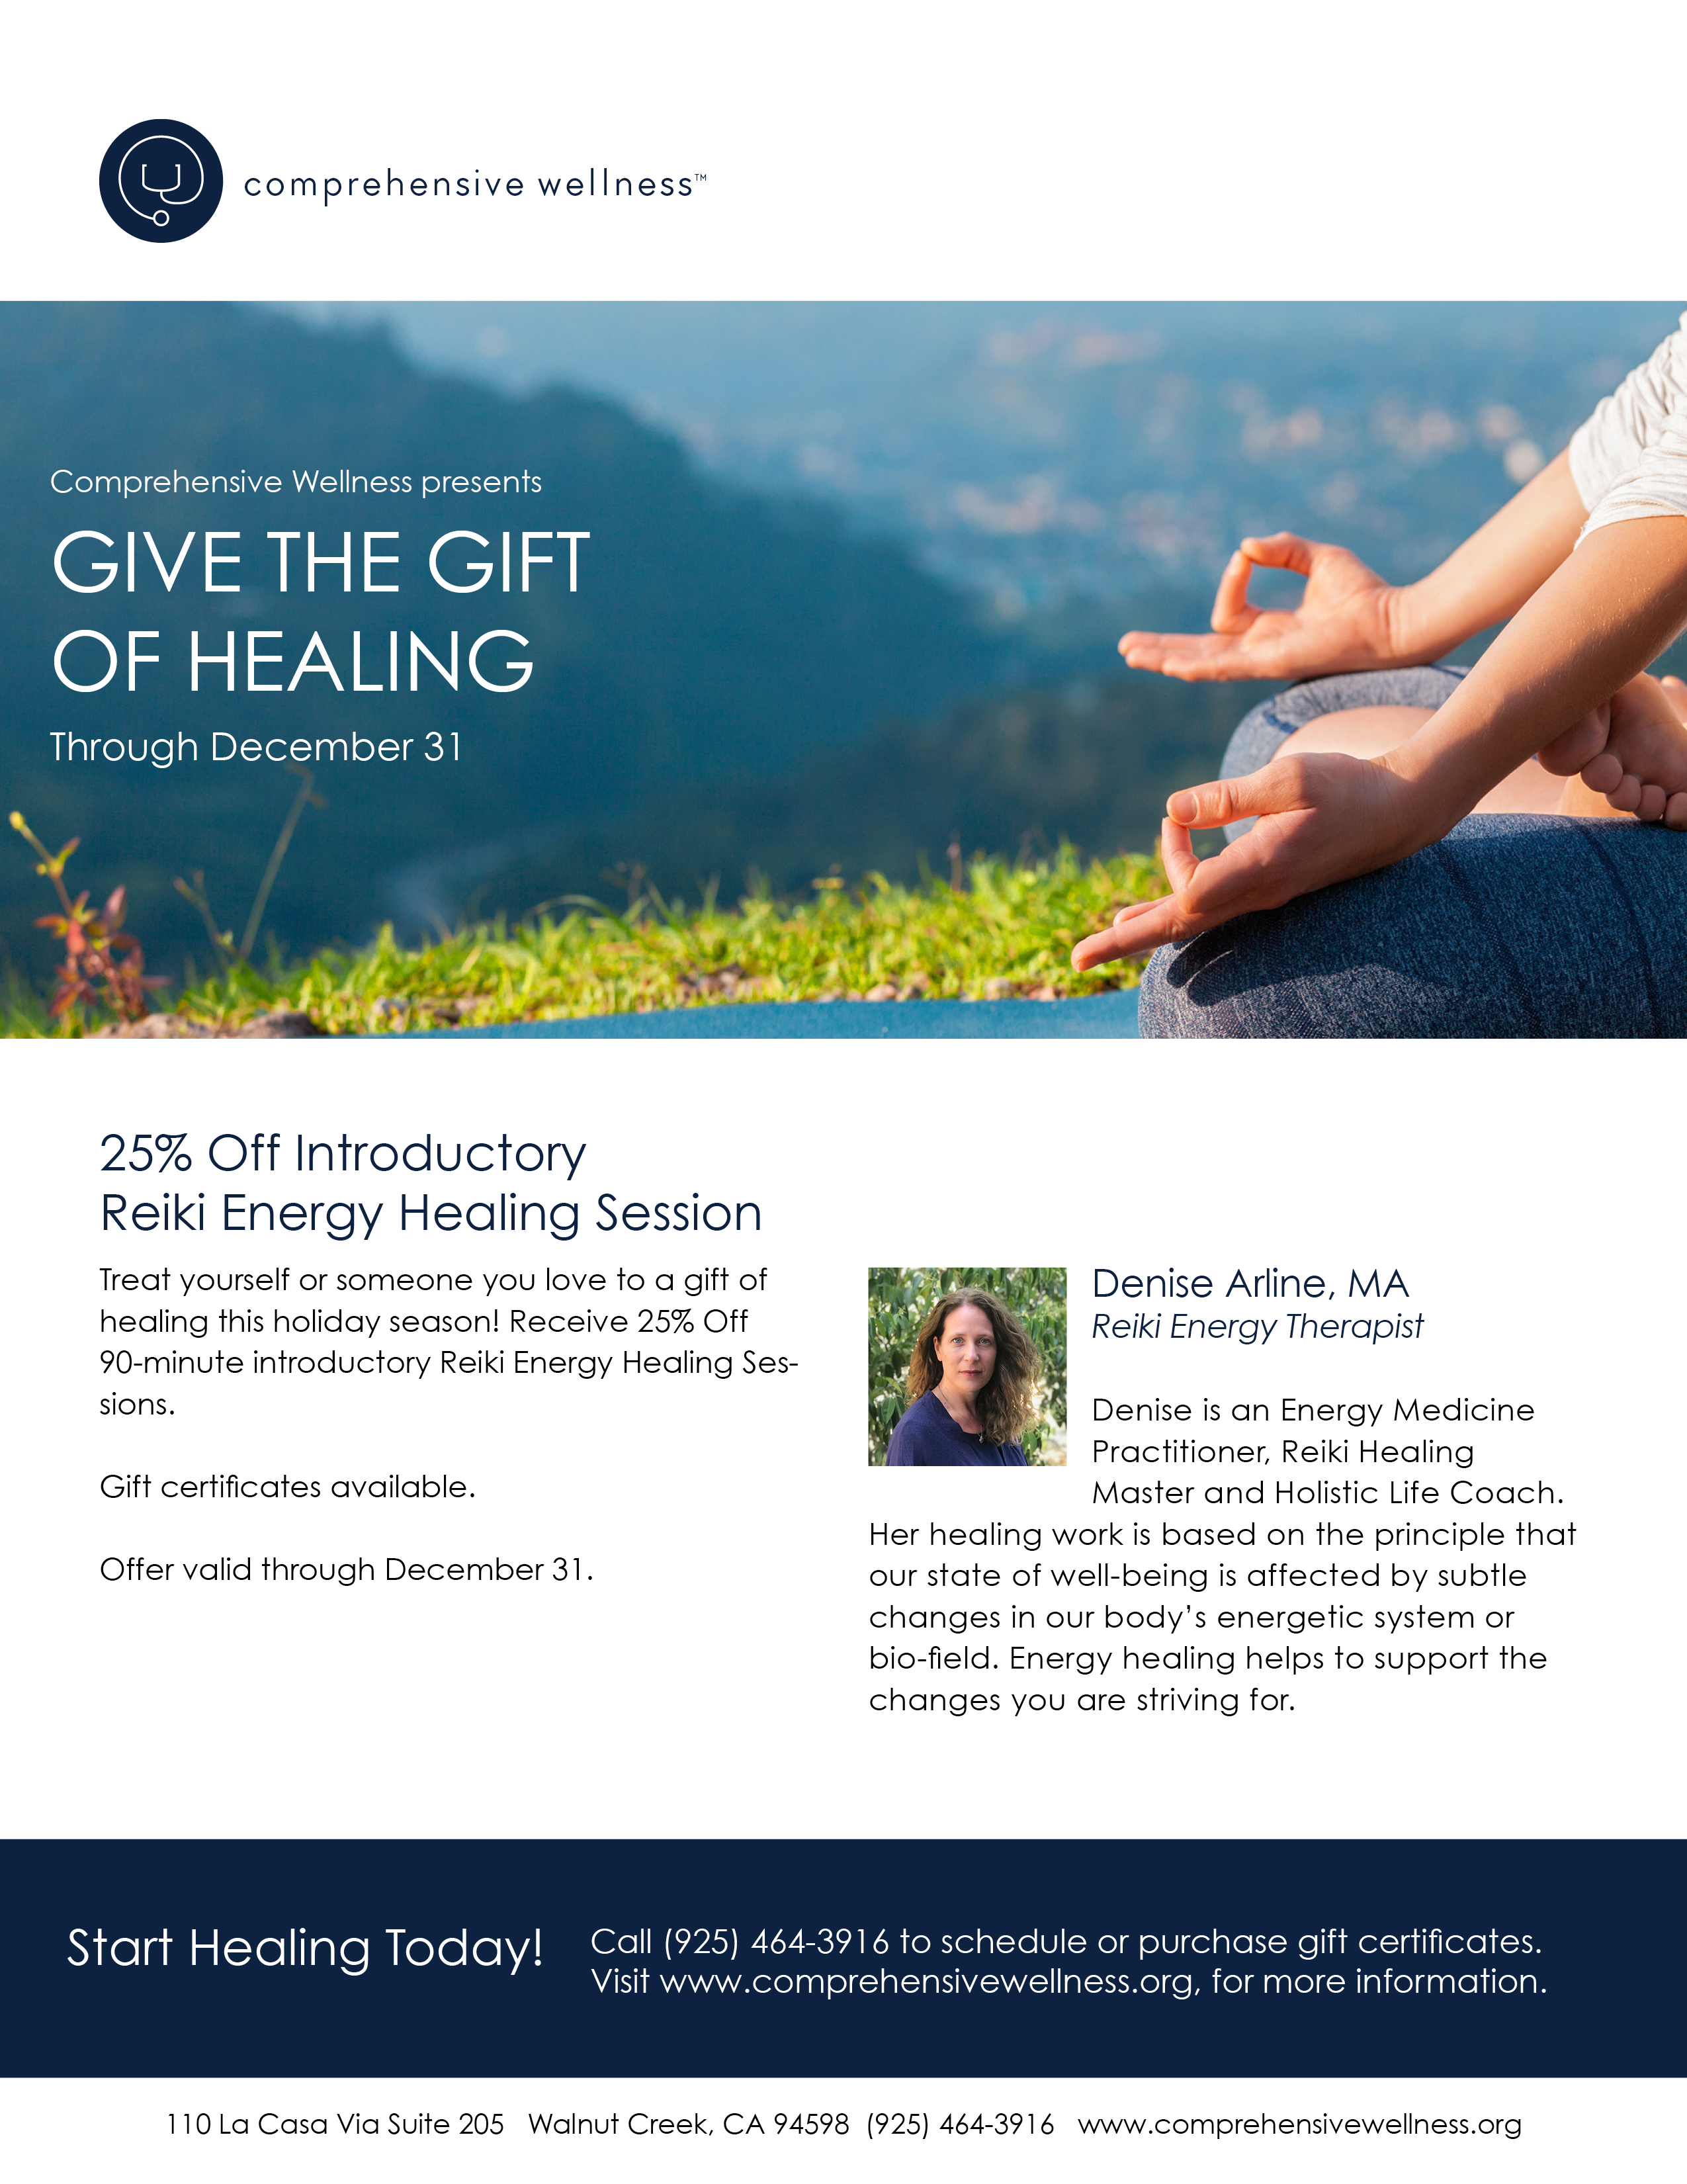 Give the Gift of Healing - 25% off 90-minute introductory session